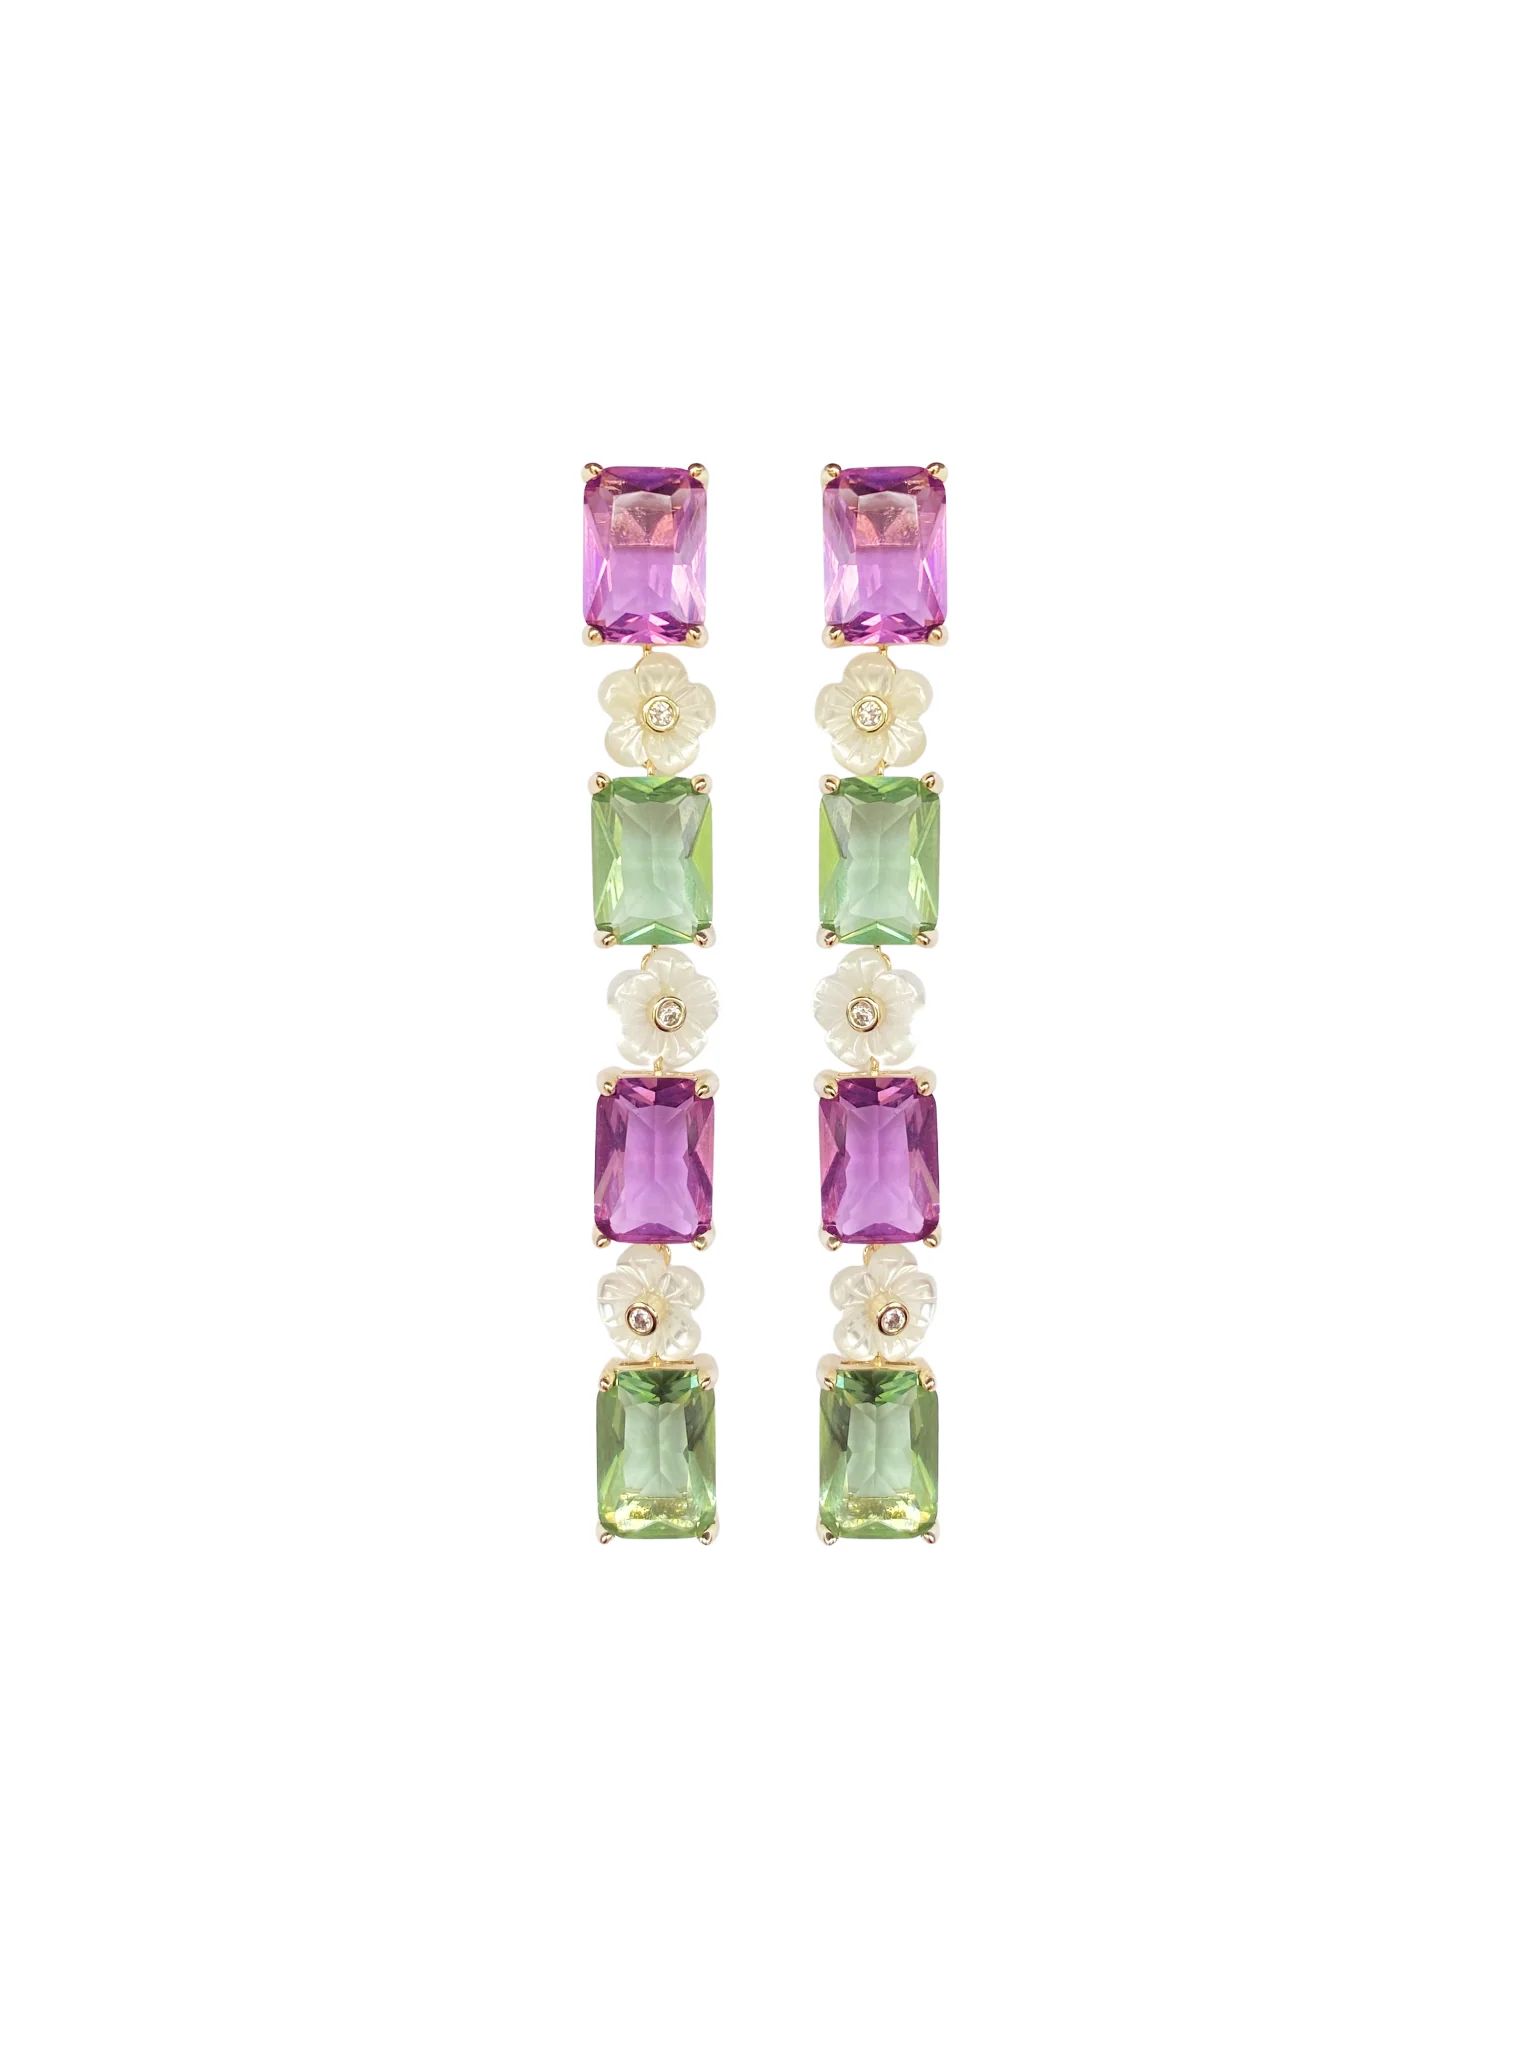 Sage Green & Lilac Mother of Pearl Flower Linear Earring | Nicola Bathie Jewelry